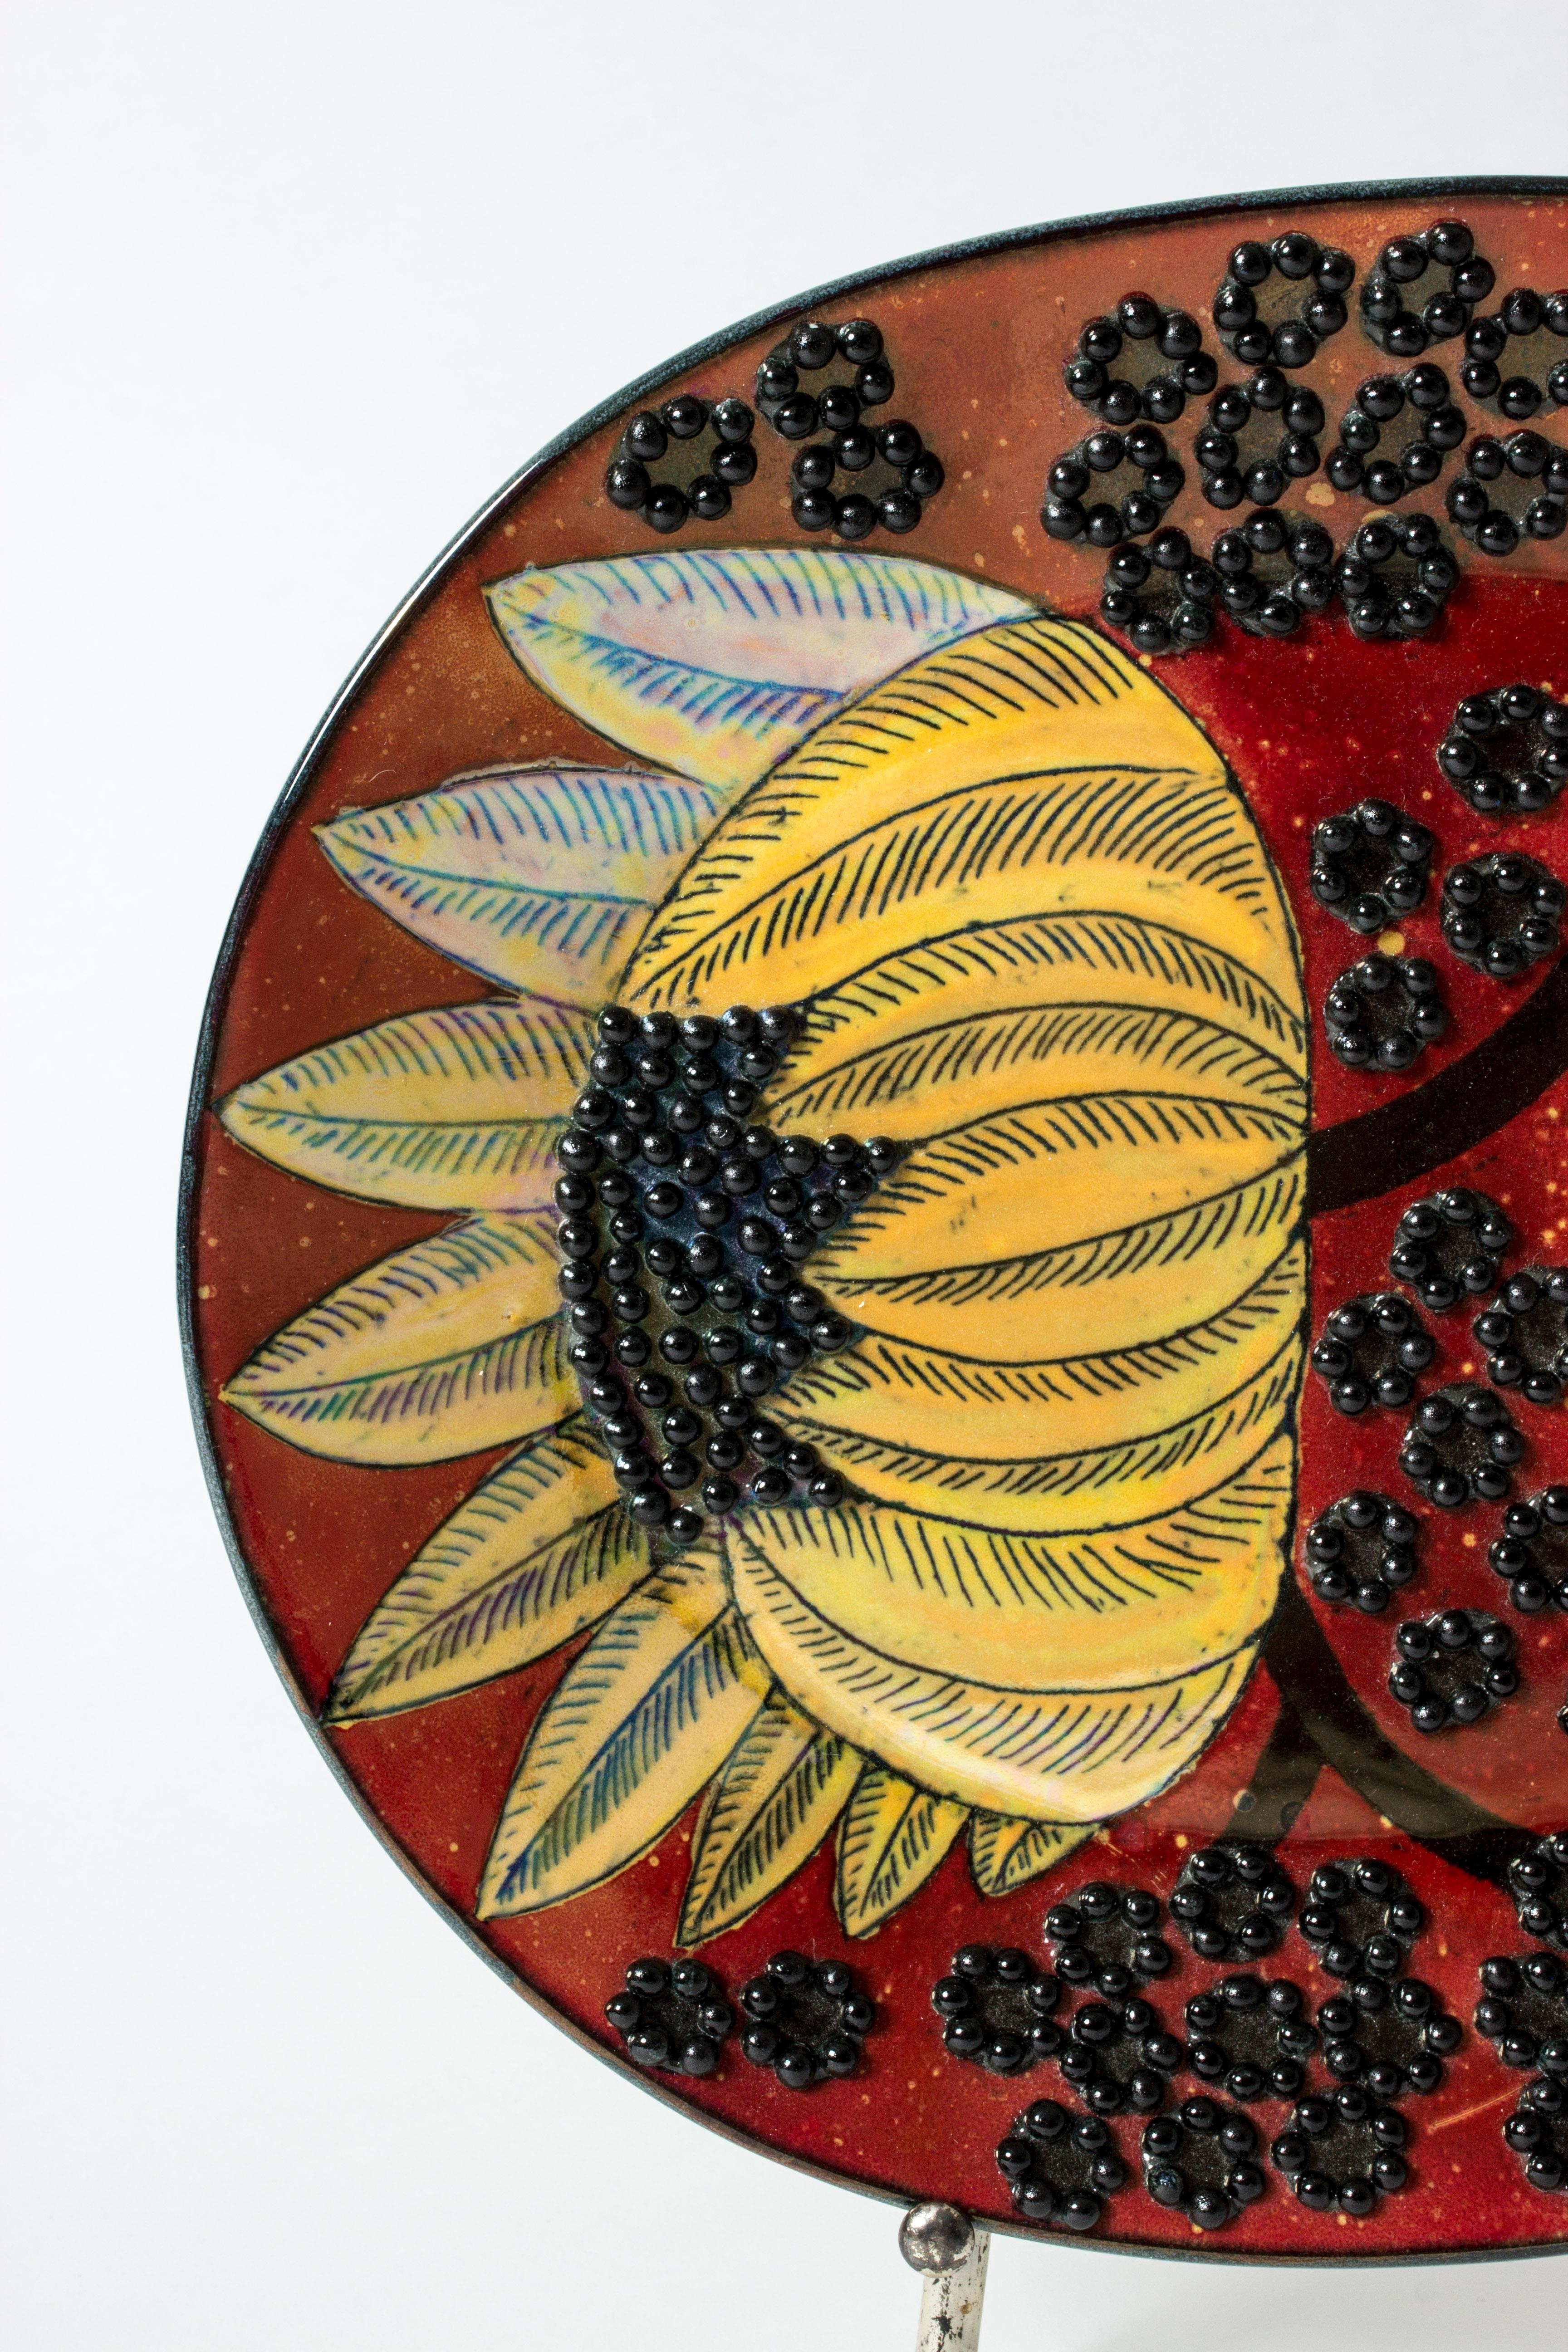 Amazing, unique stoneware platter by Birger Kaipiainen in an oval form. Beautiful composition of yellow sunflowers against a rich red background, surrounded by a pattern of round black seeds in relief.